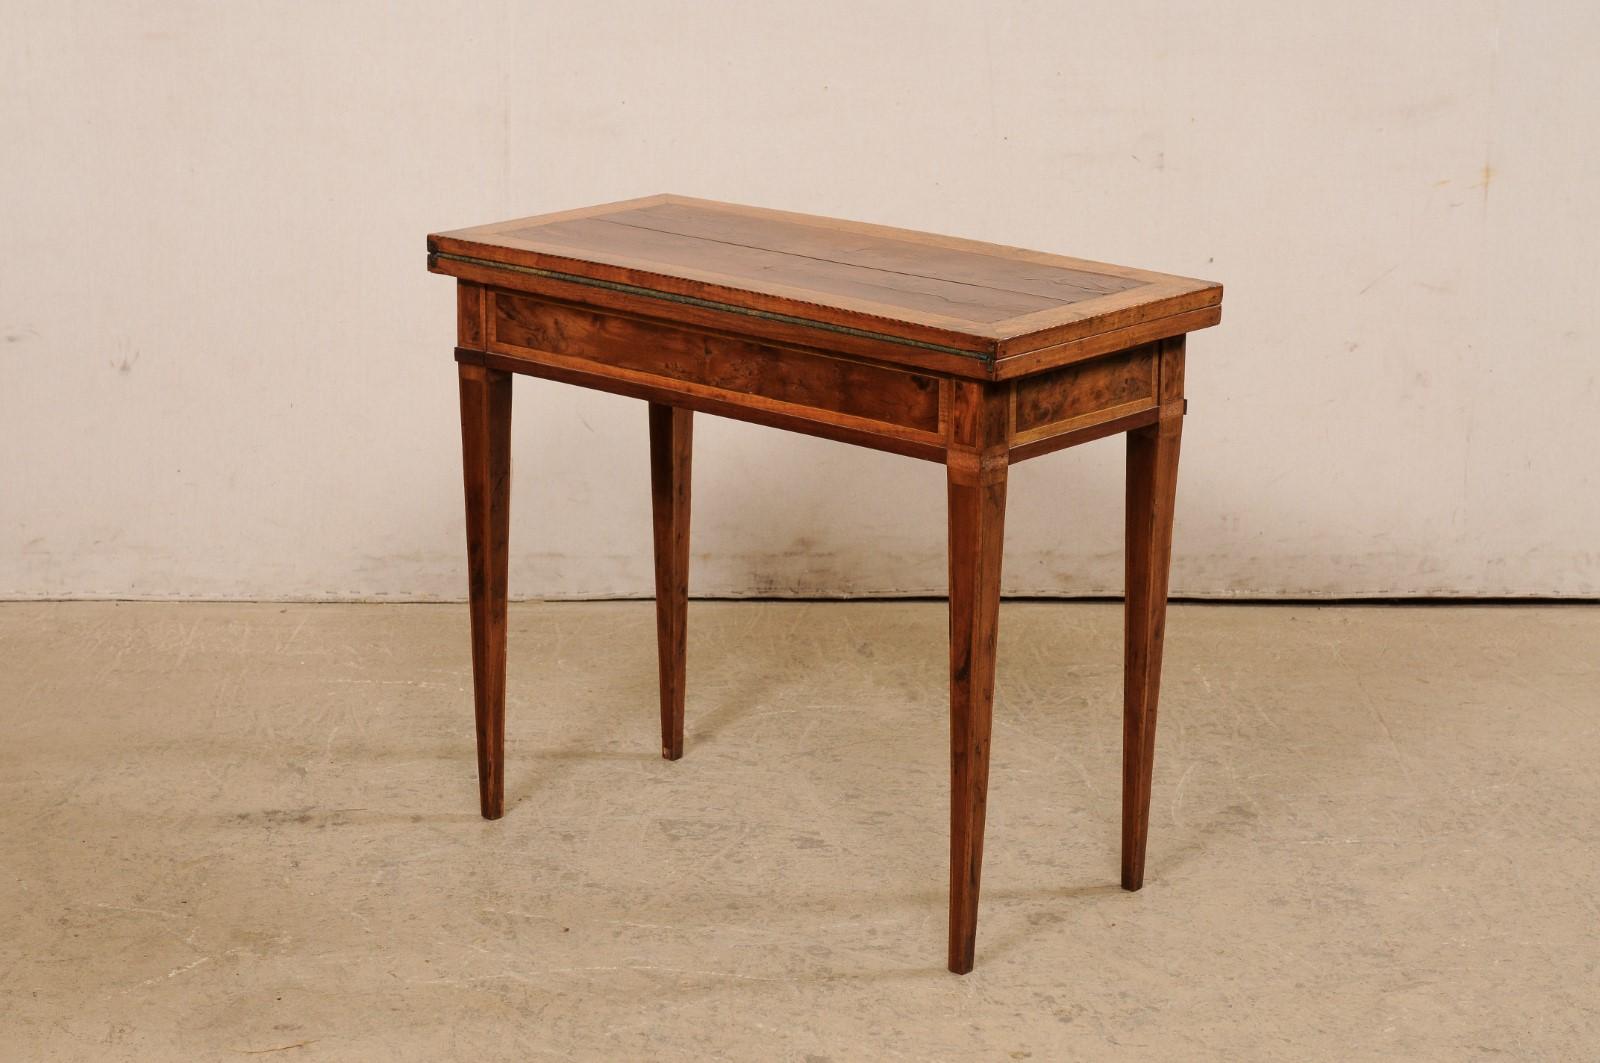 19th C. French Petite-Size Flip Top Table 'Transitional to a Card/Games Table' For Sale 1